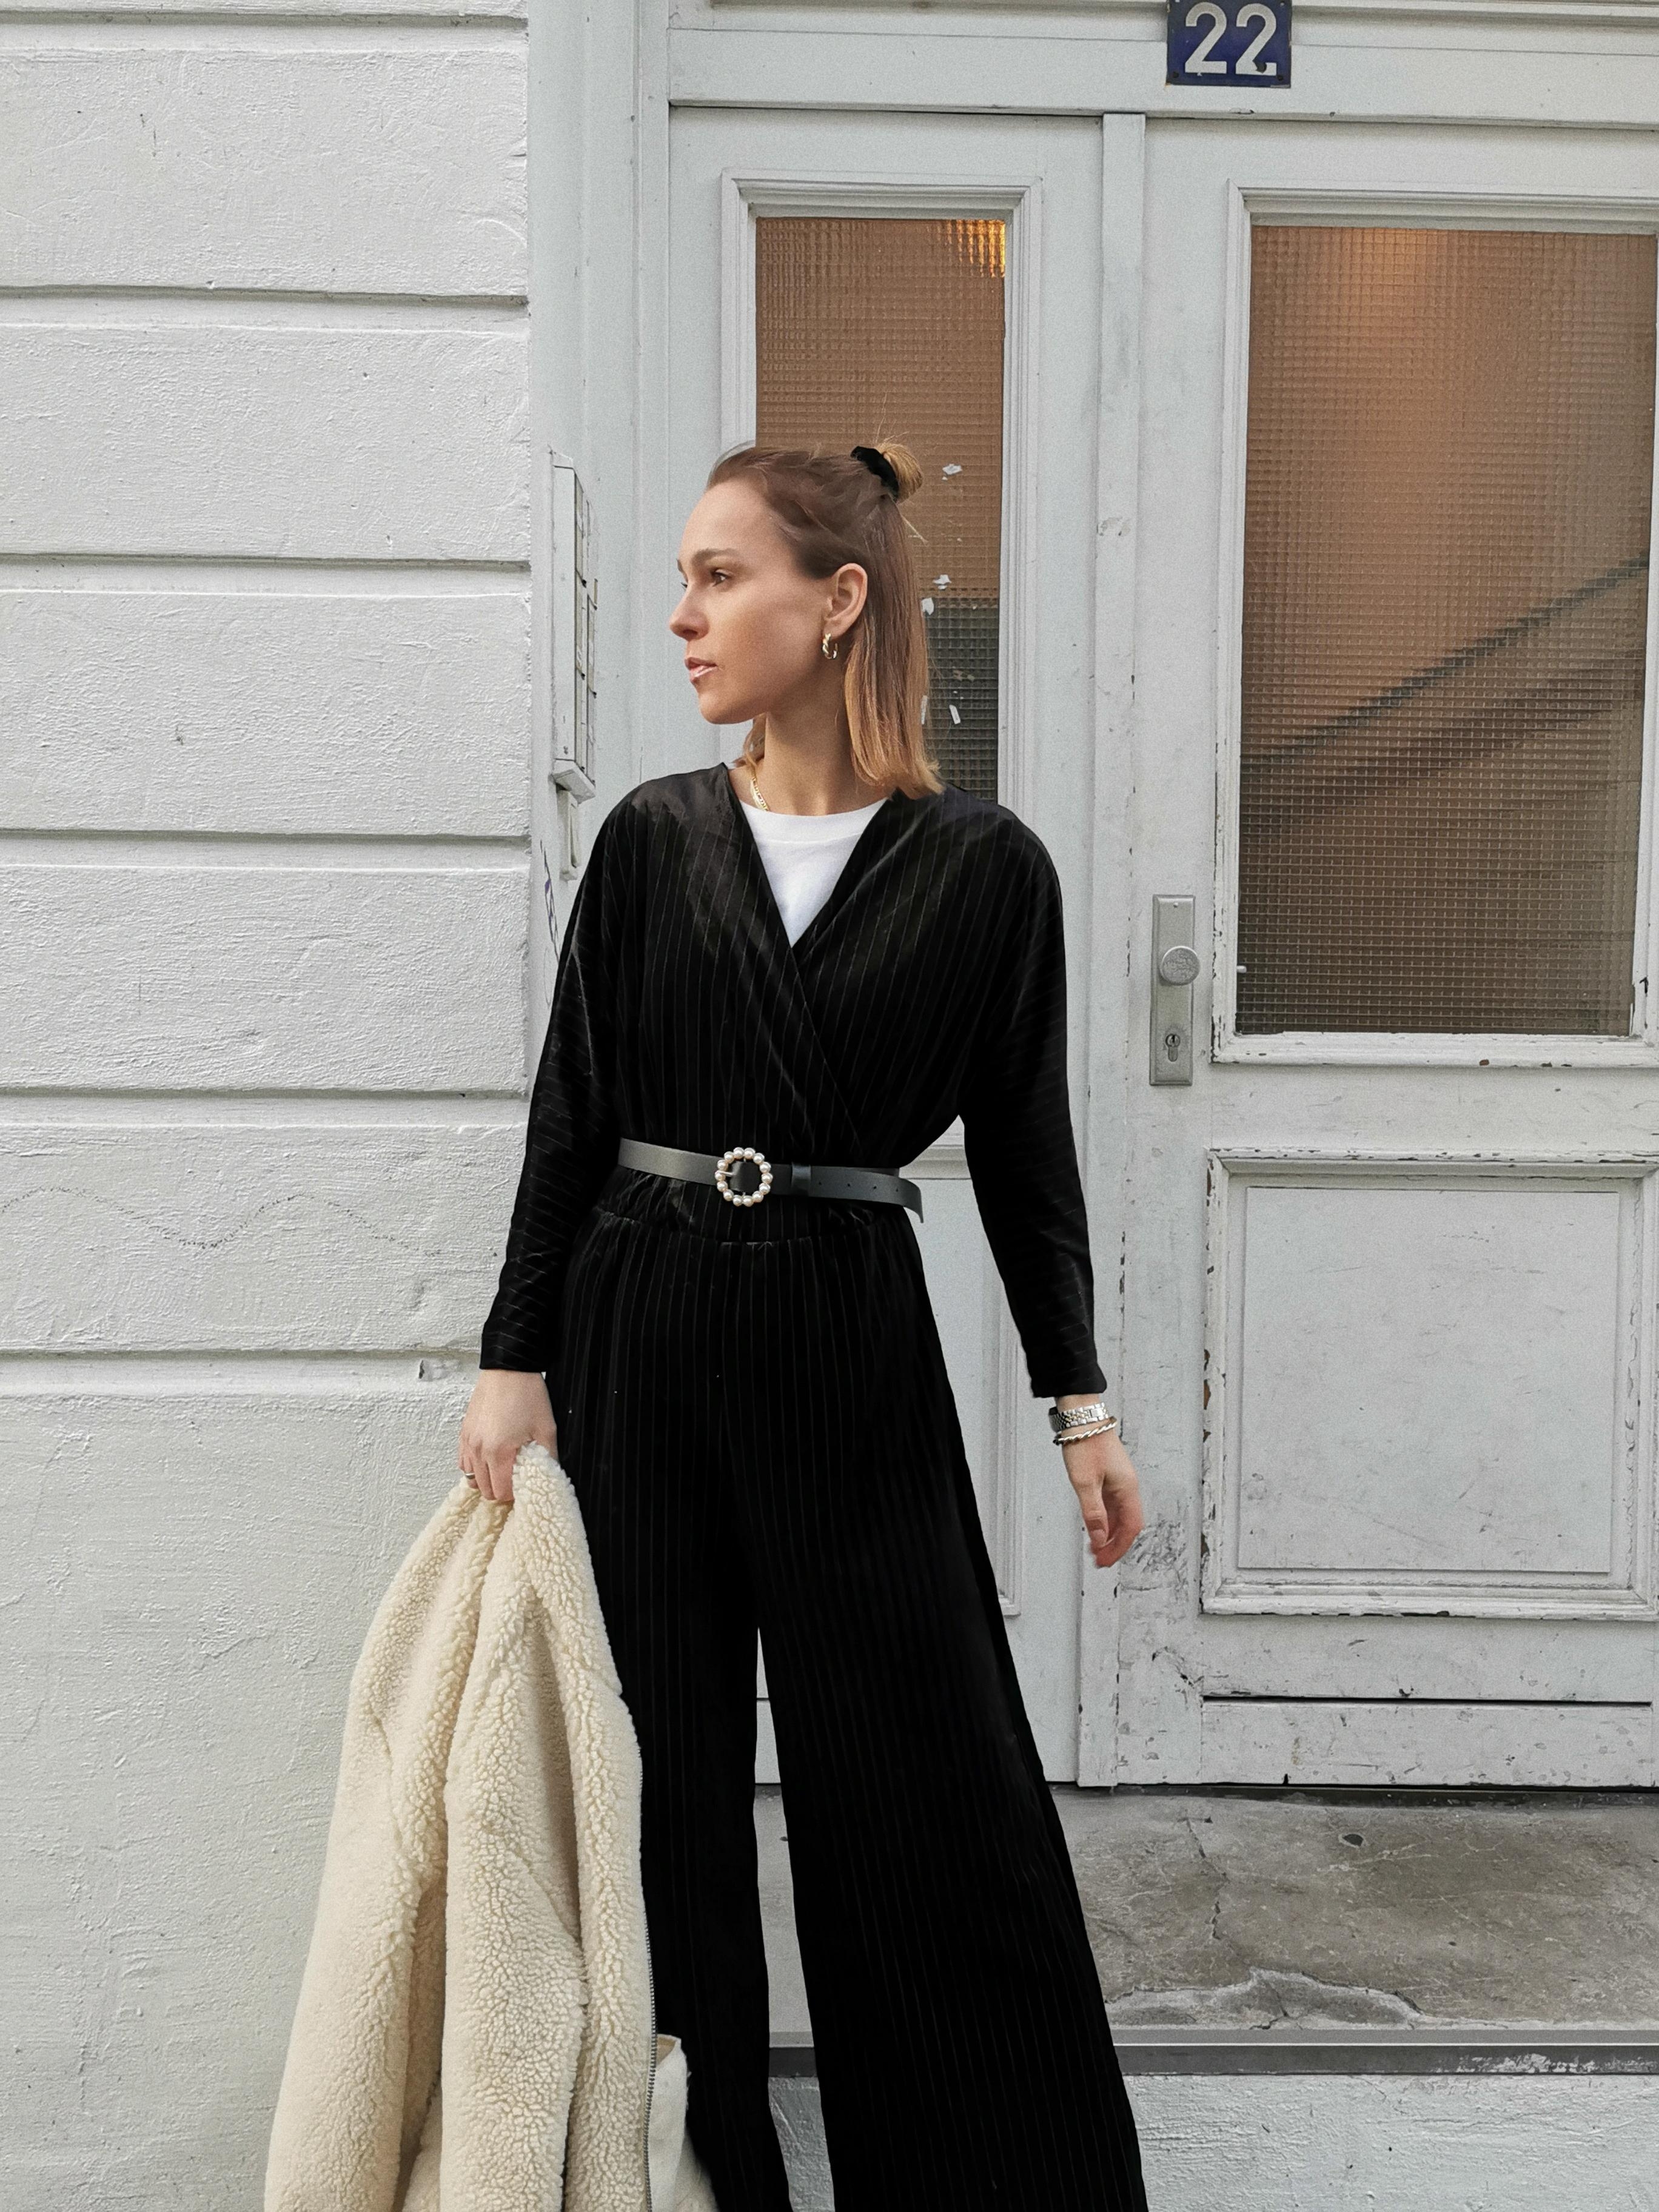 Christmas Outfit ✨ #weihnachtslook #fashion #streetstyle #overall #weihnachtsoutfit #jumpsuit 